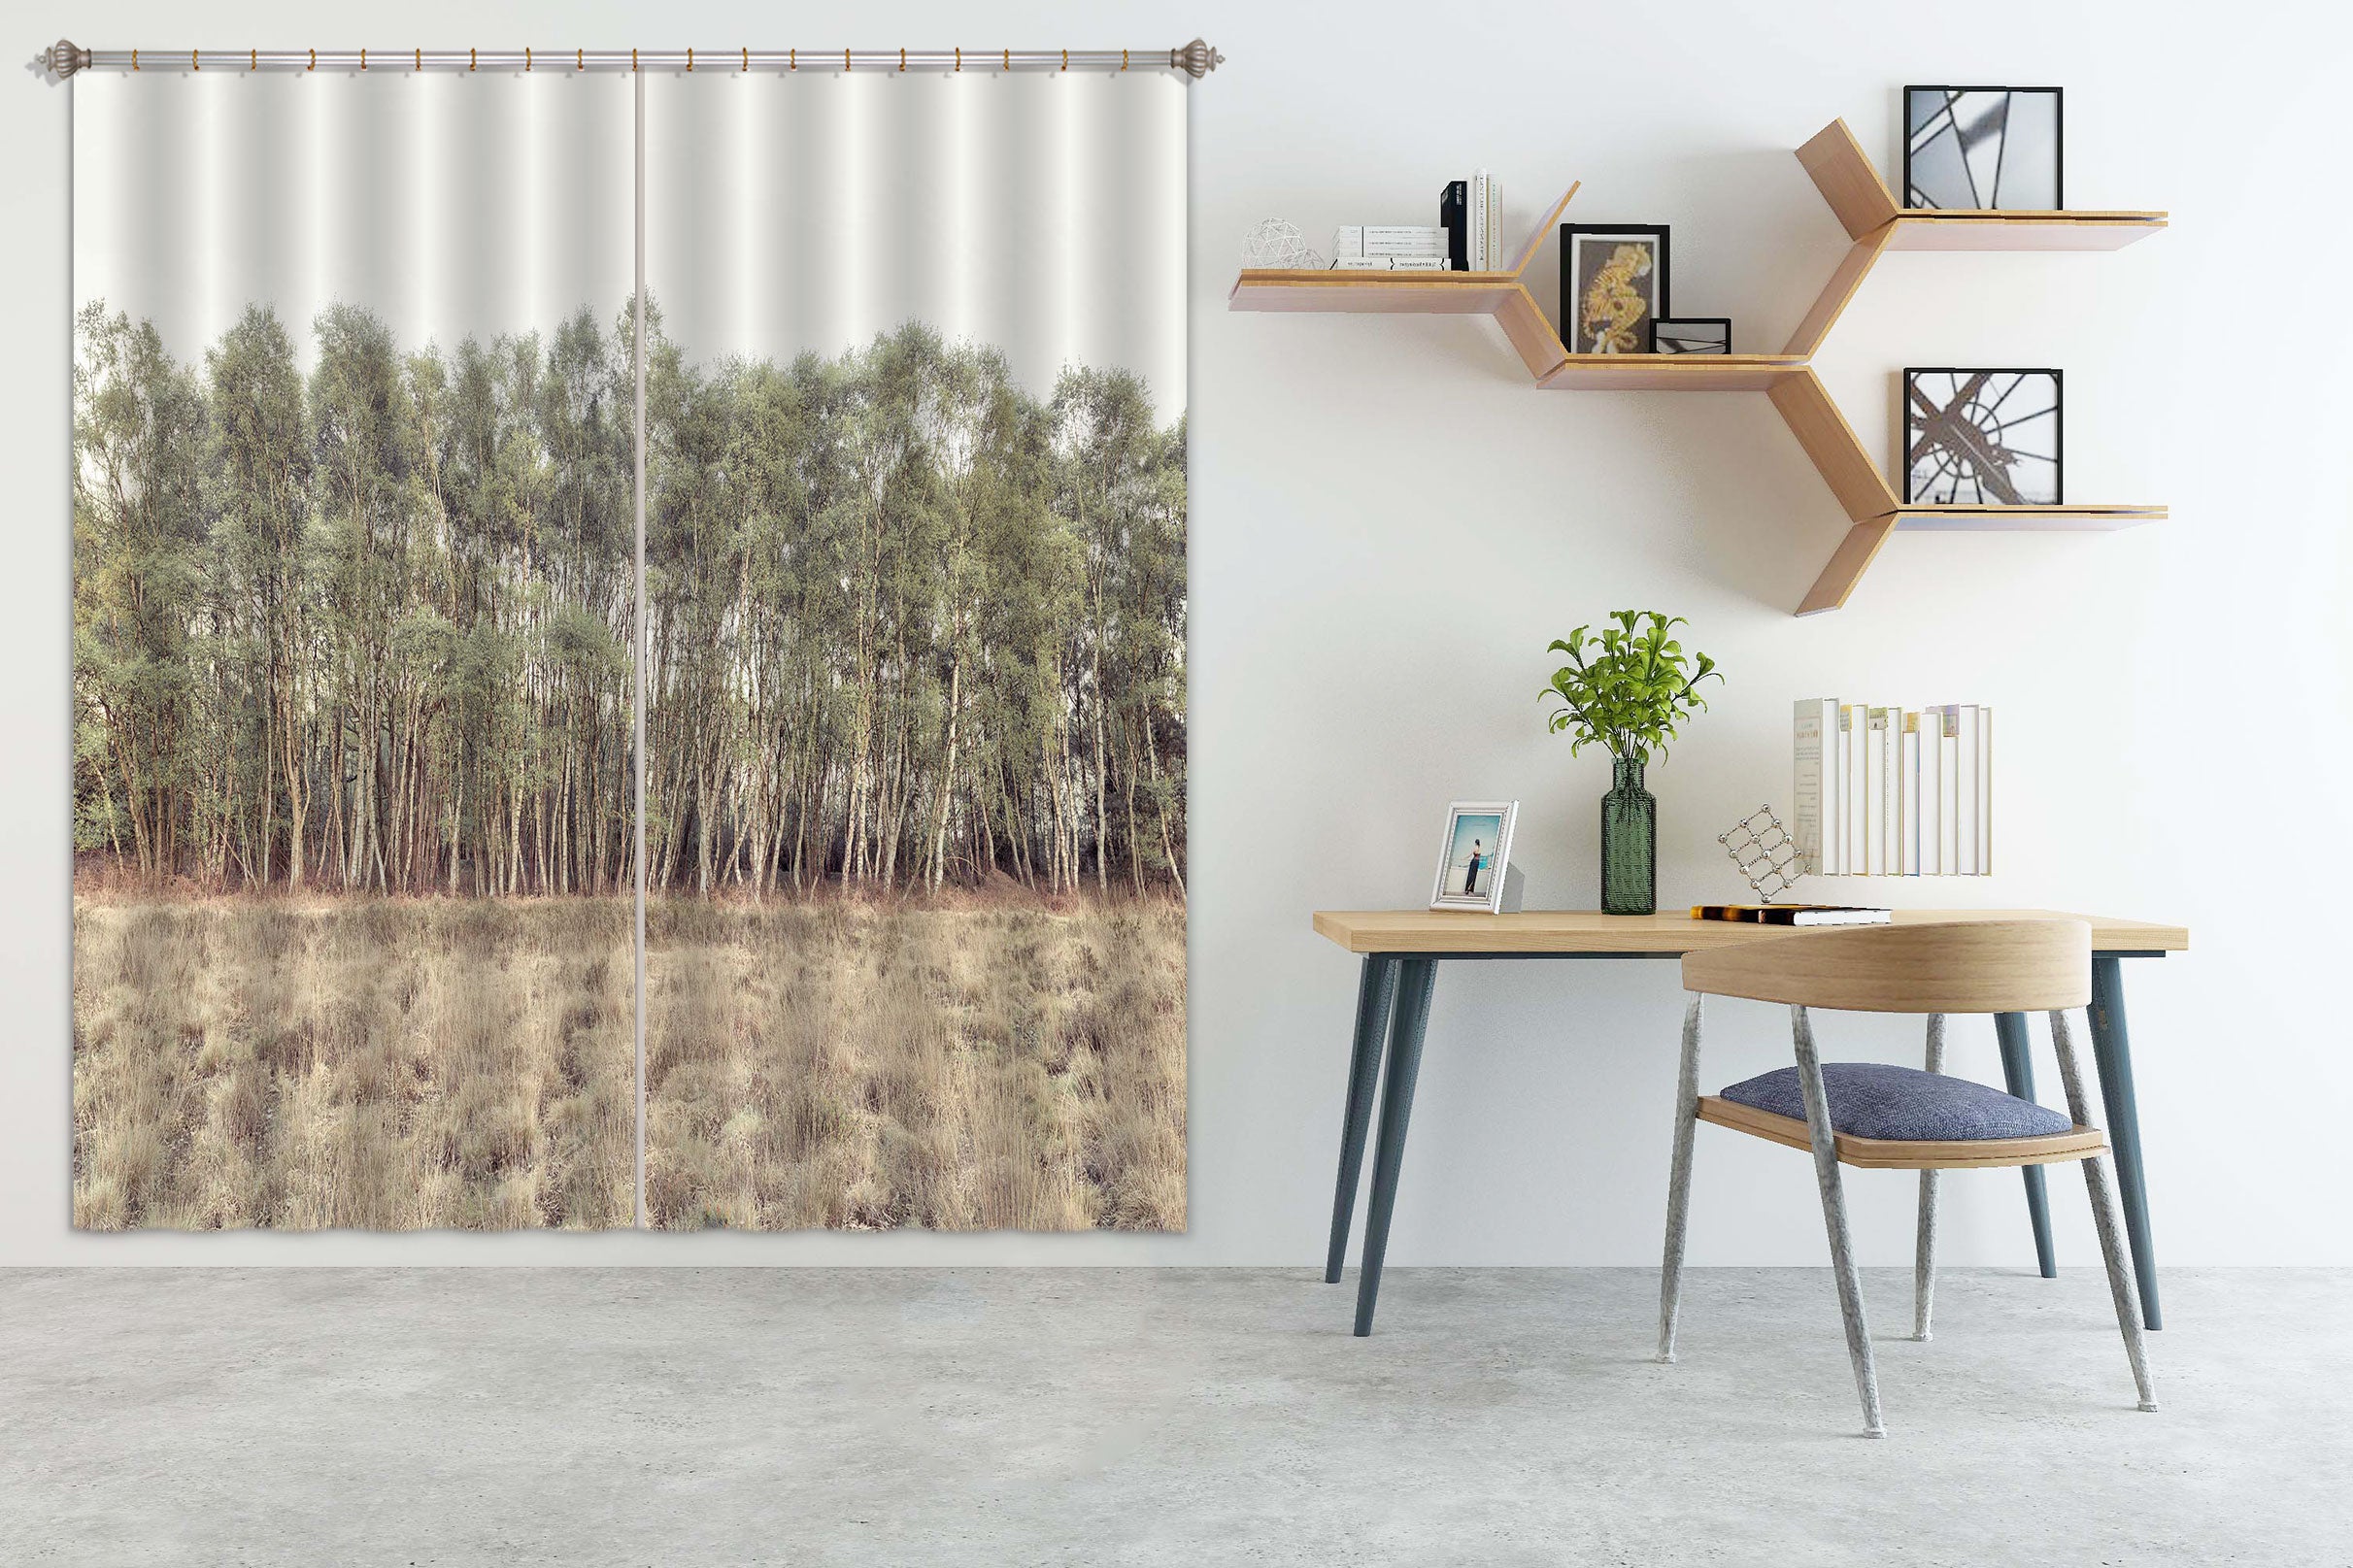 3D Forest Weed 056 Assaf Frank Curtain Curtains Drapes